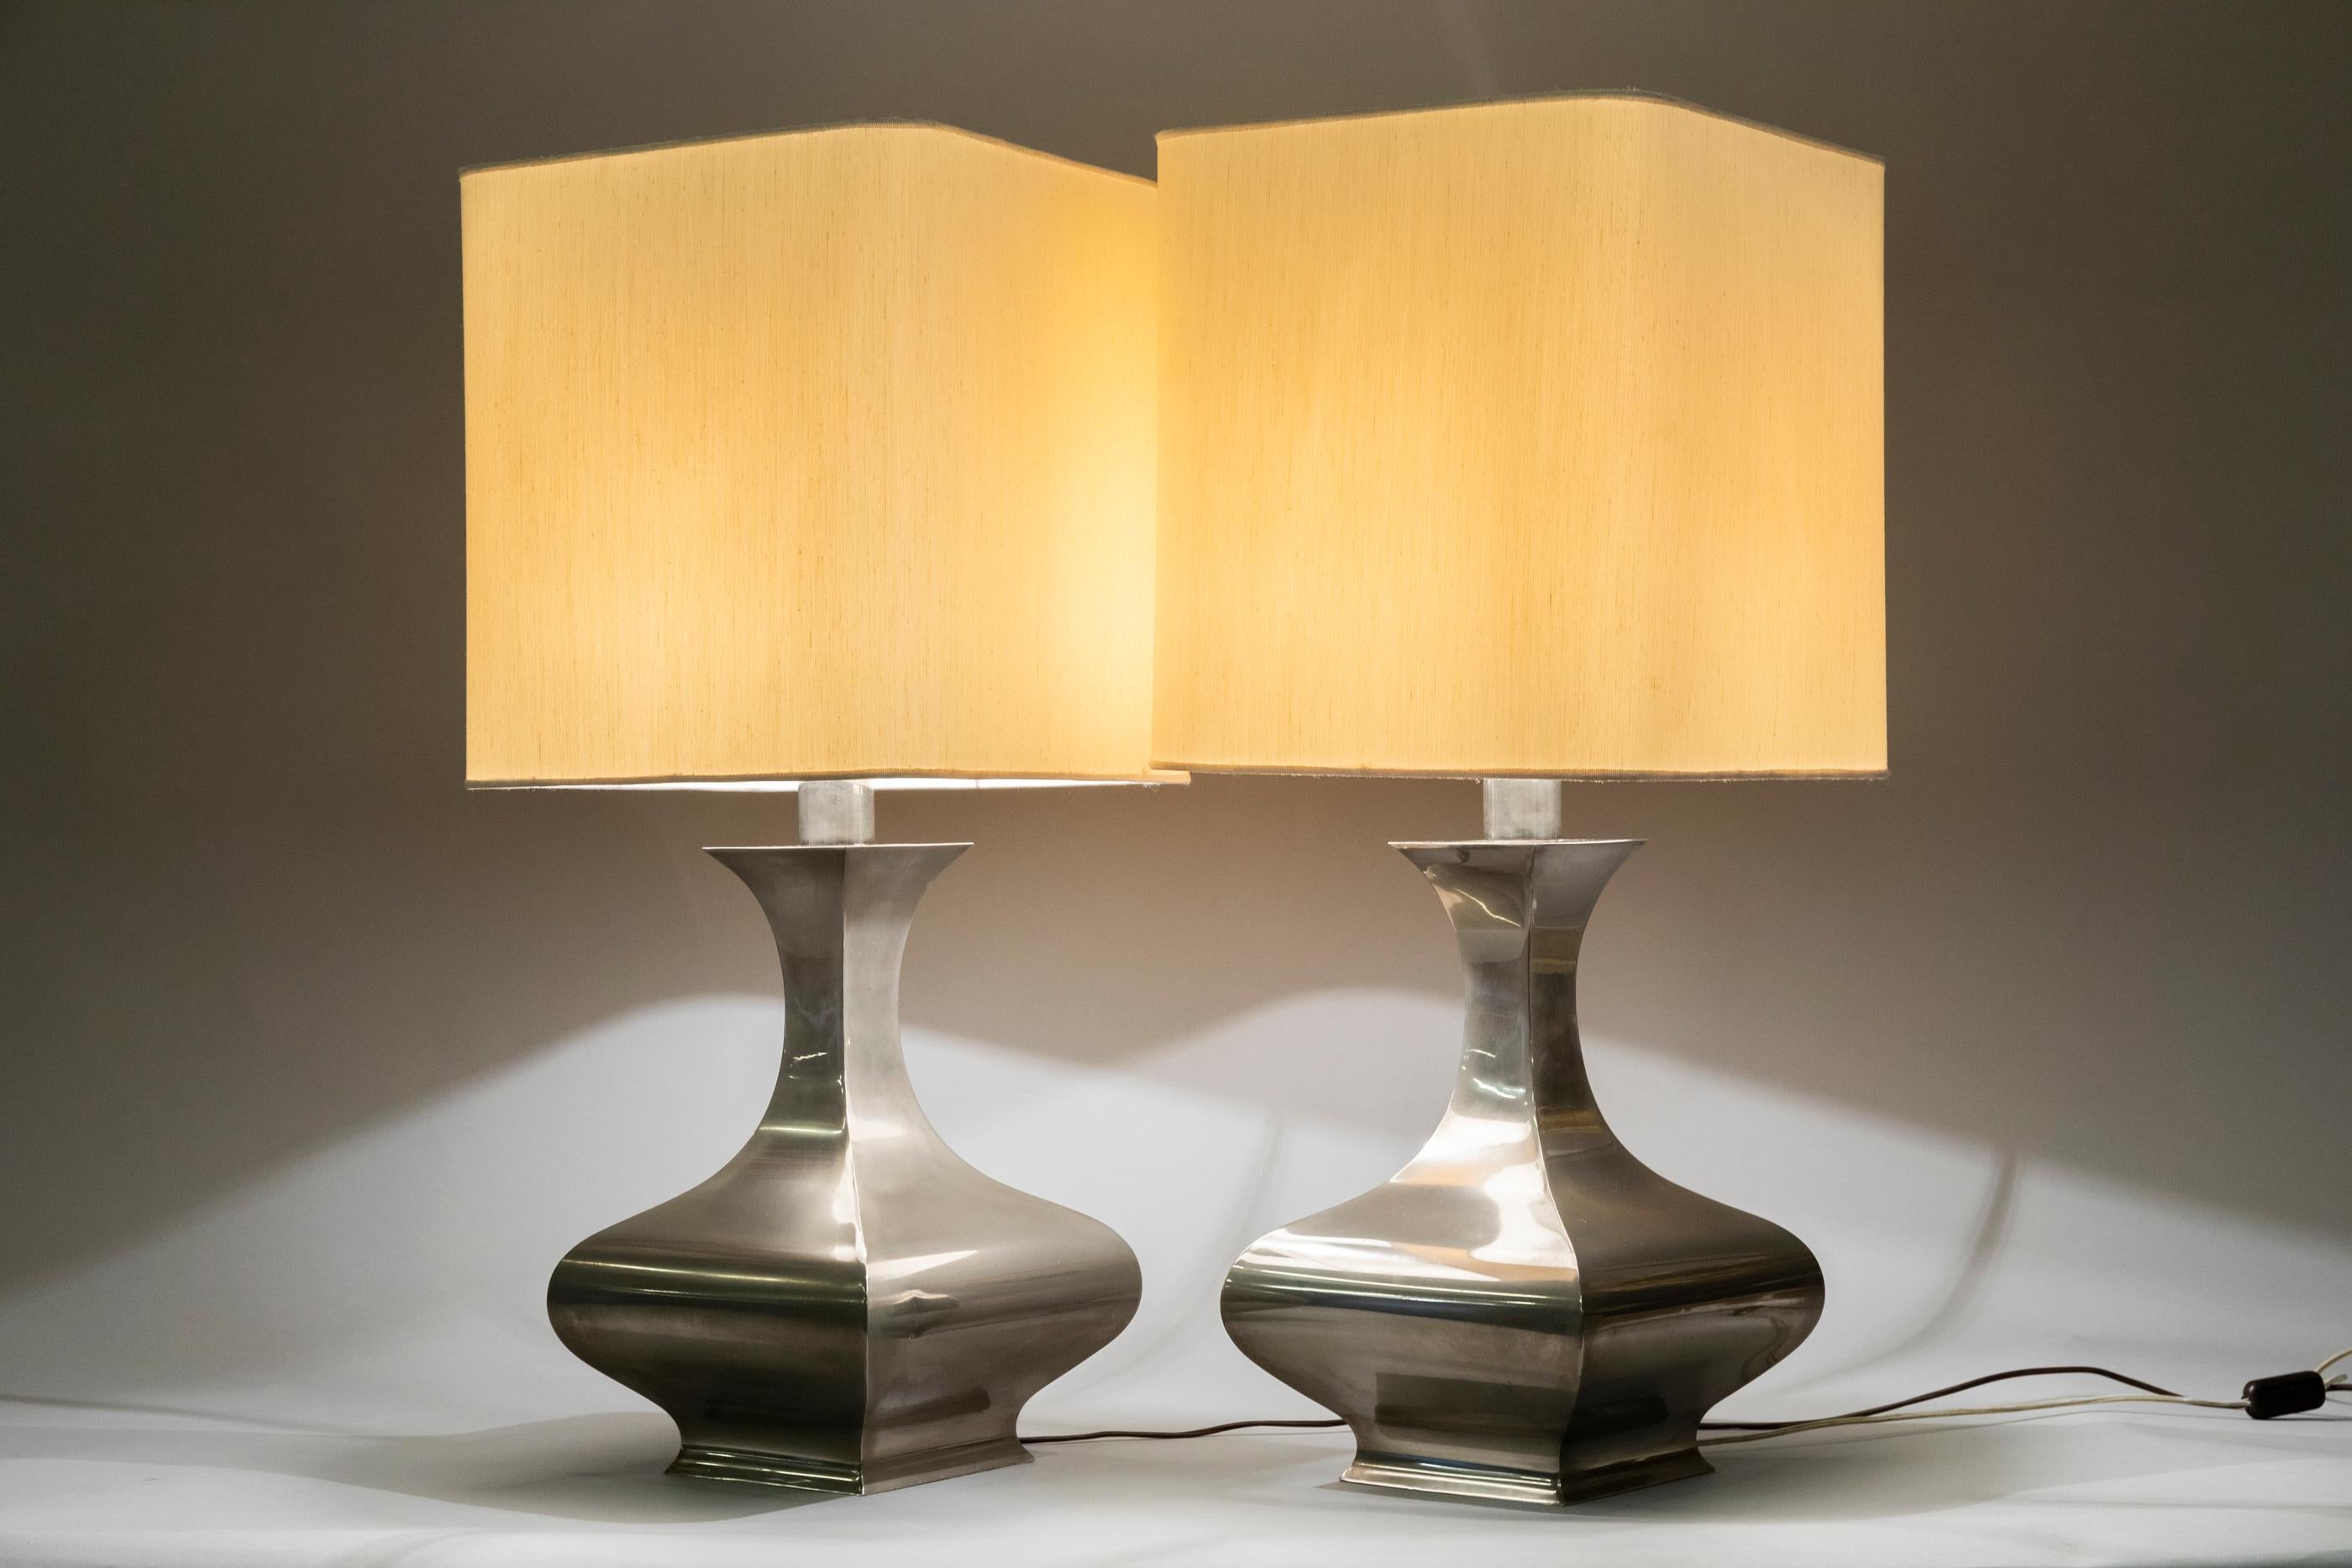 2 table lamps in stainless steel from Il Punto La Bottega, very chic. Italy, circa 1970.